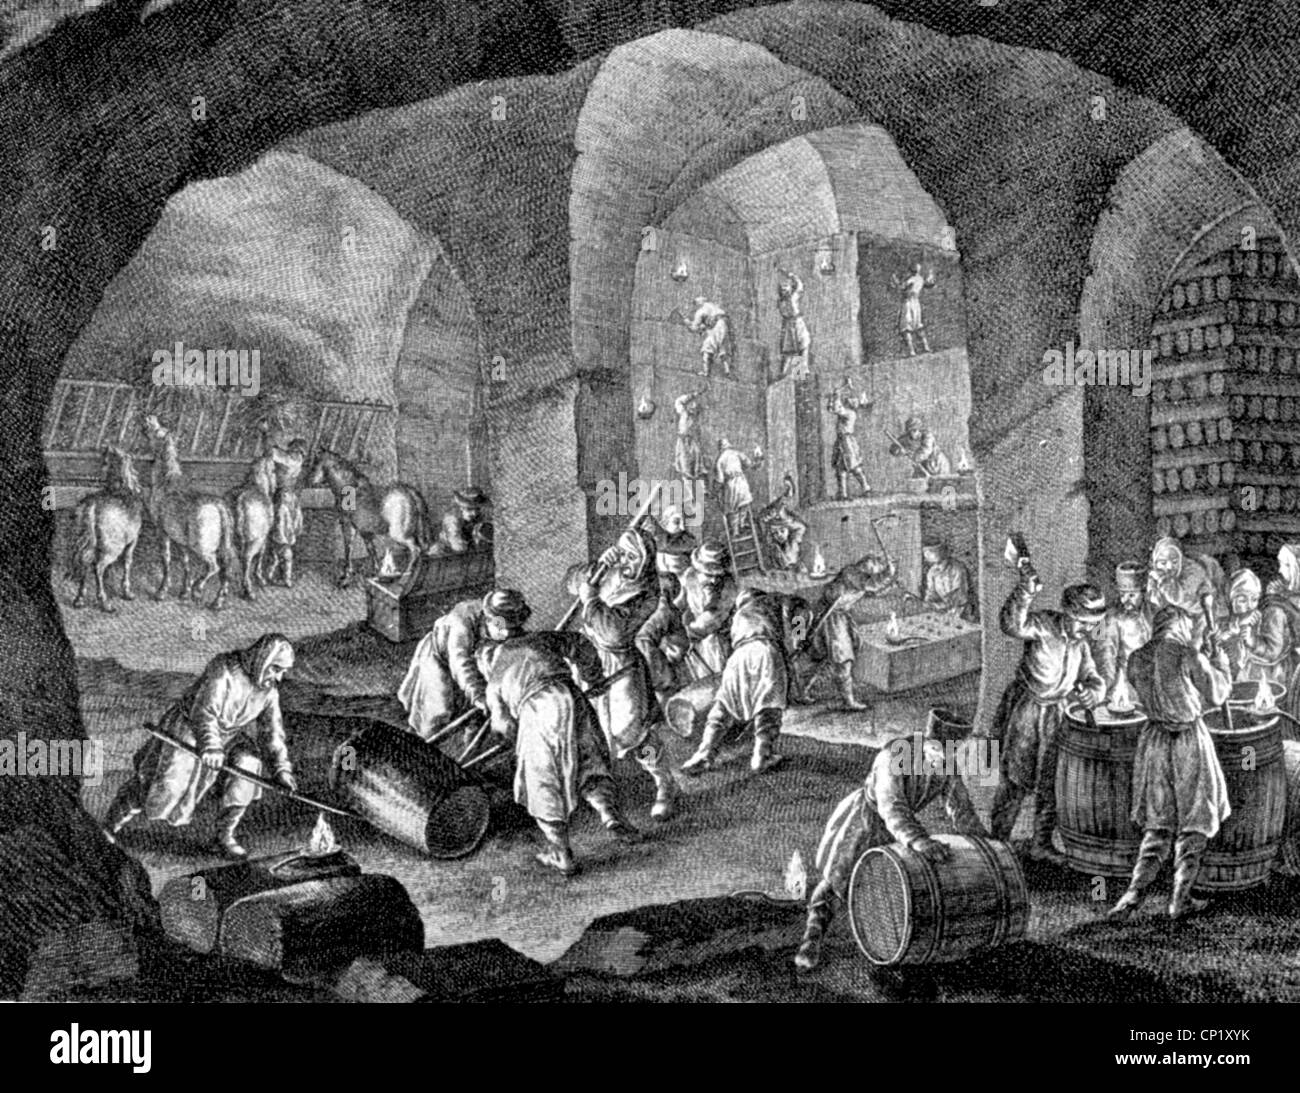 mining, salt, salt mine, interior view, copper engraving, early 18th century, rock salt, underground mining, miners, working, labour, historic, historical, people, Artist's Copyright has not to be cleared Stock Photo